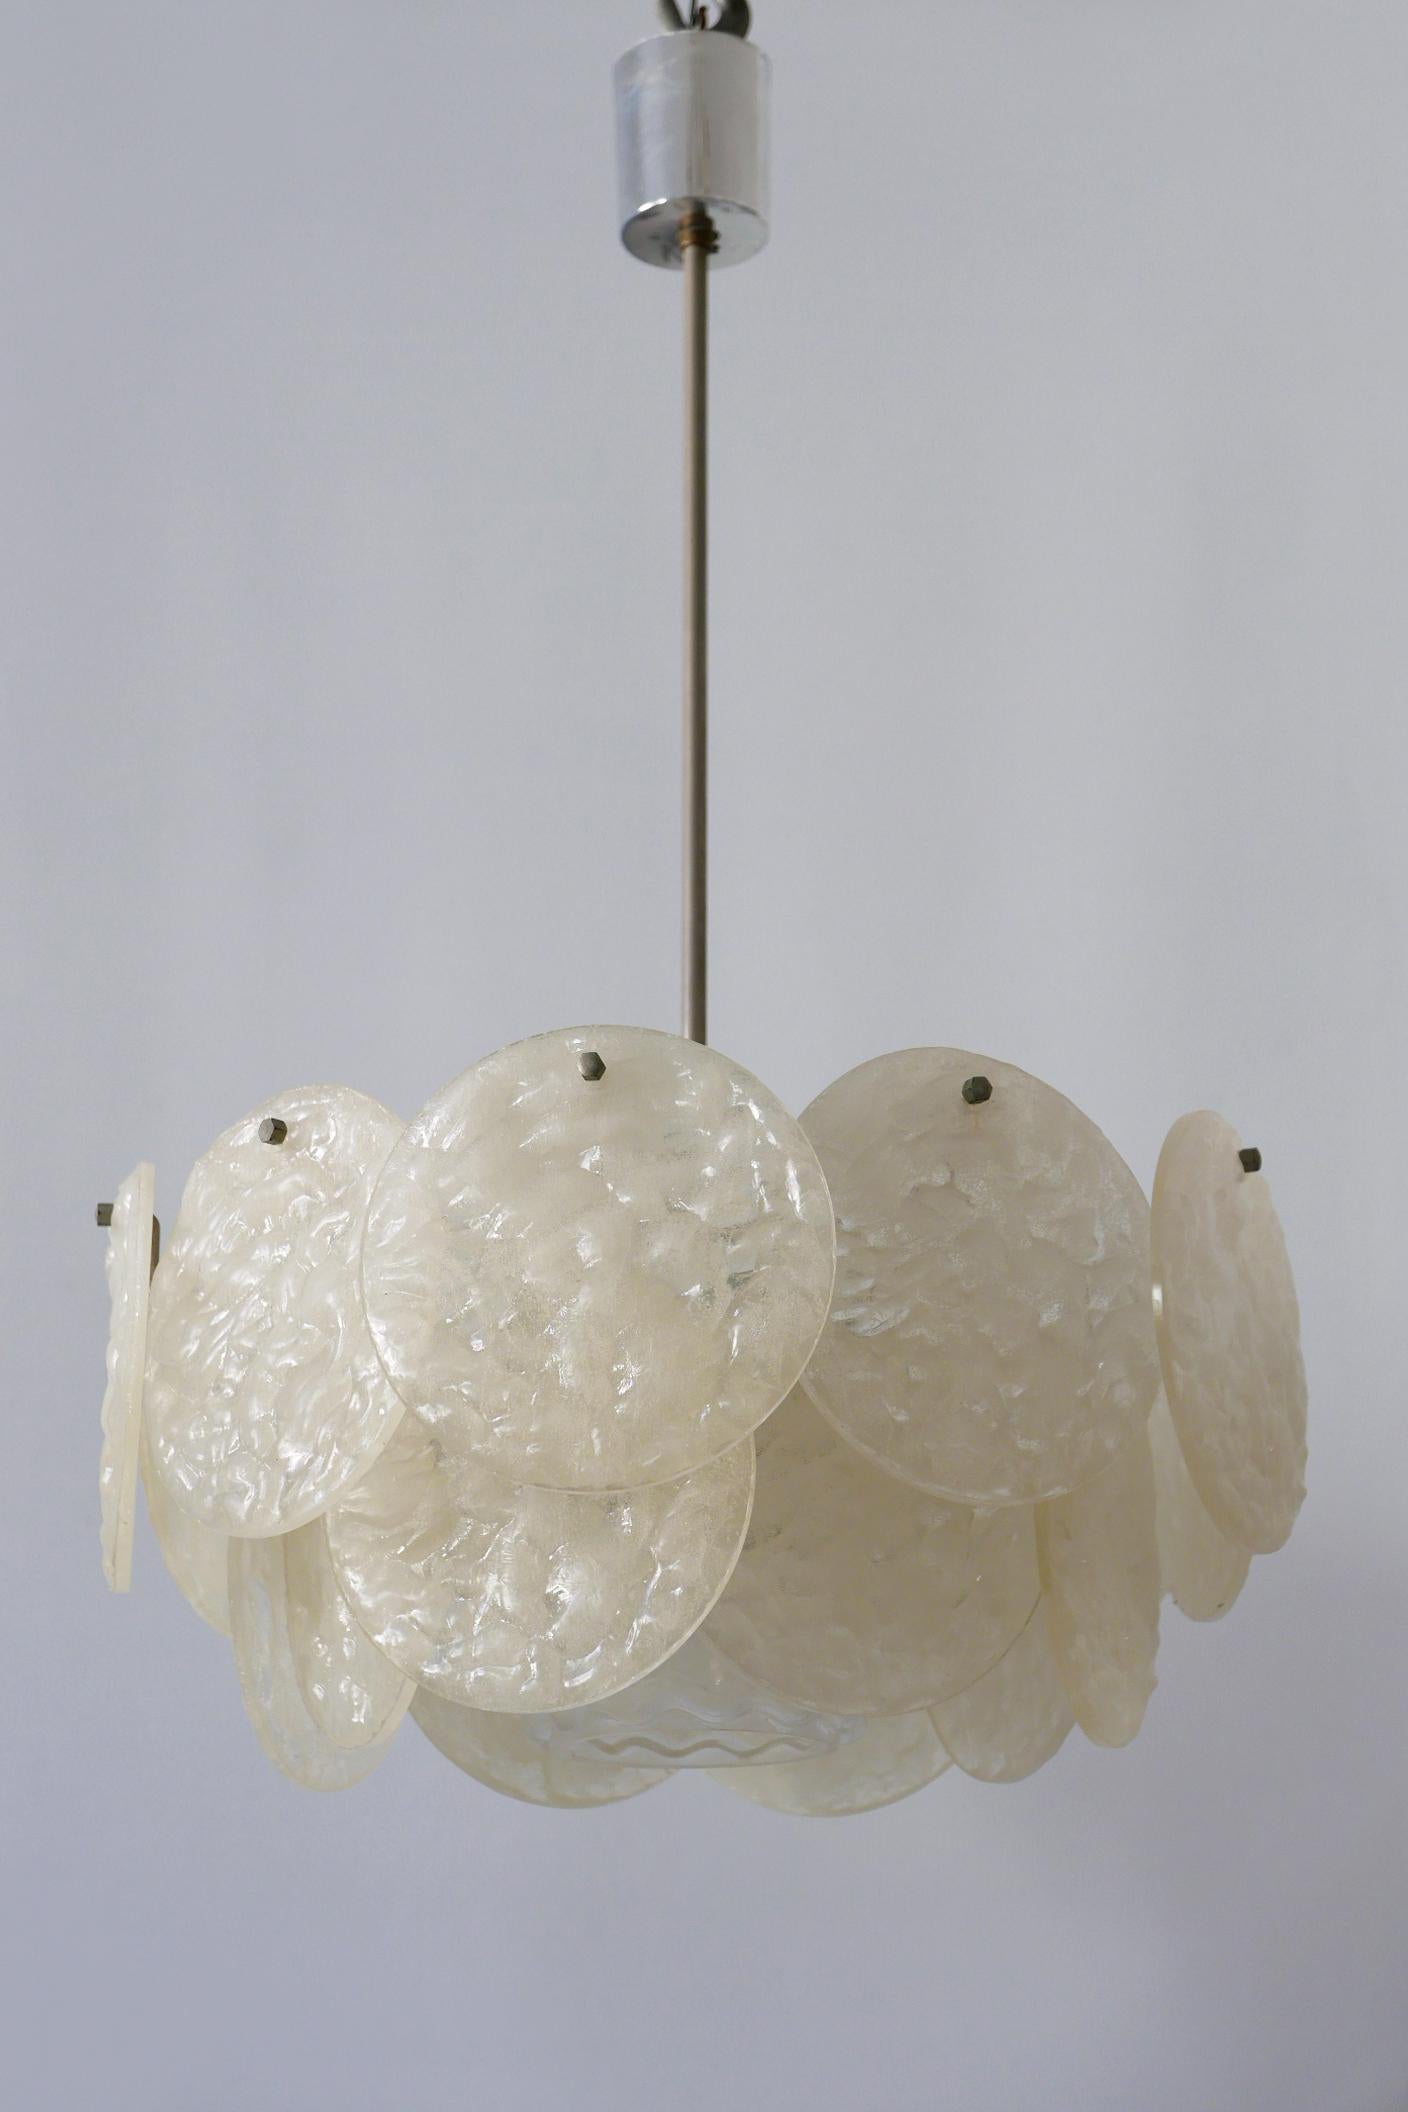 Mid-Century Modern Chandelier or Pendant Lamp with Textured Acrylic Discs, 1960s For Sale 5